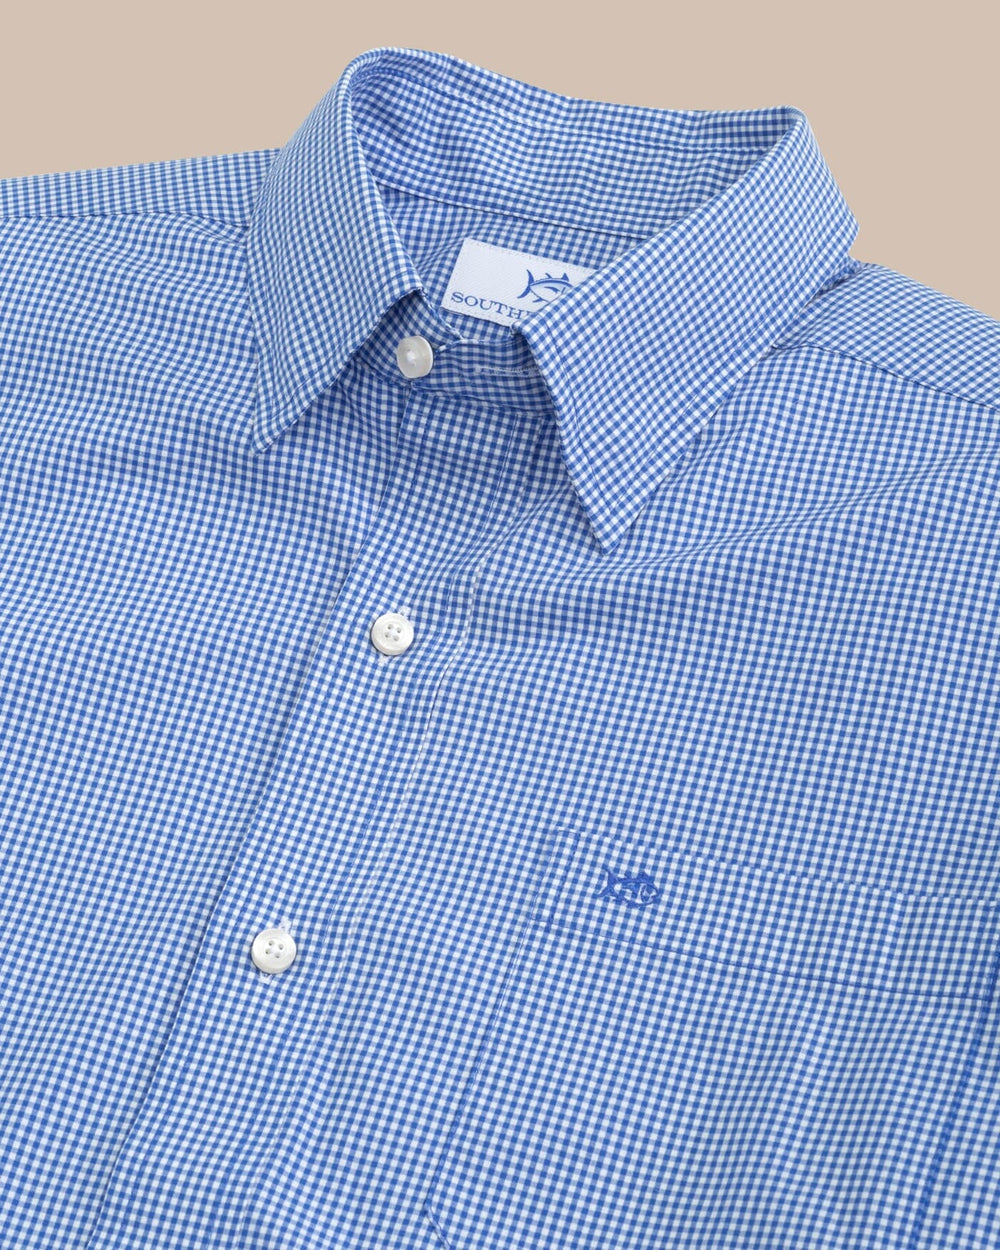 The detail view of the Southern Tide Charleston Parkwood Microgingham Long Sleeve Sport Shirt by Southern Tide - Cobalt Blue